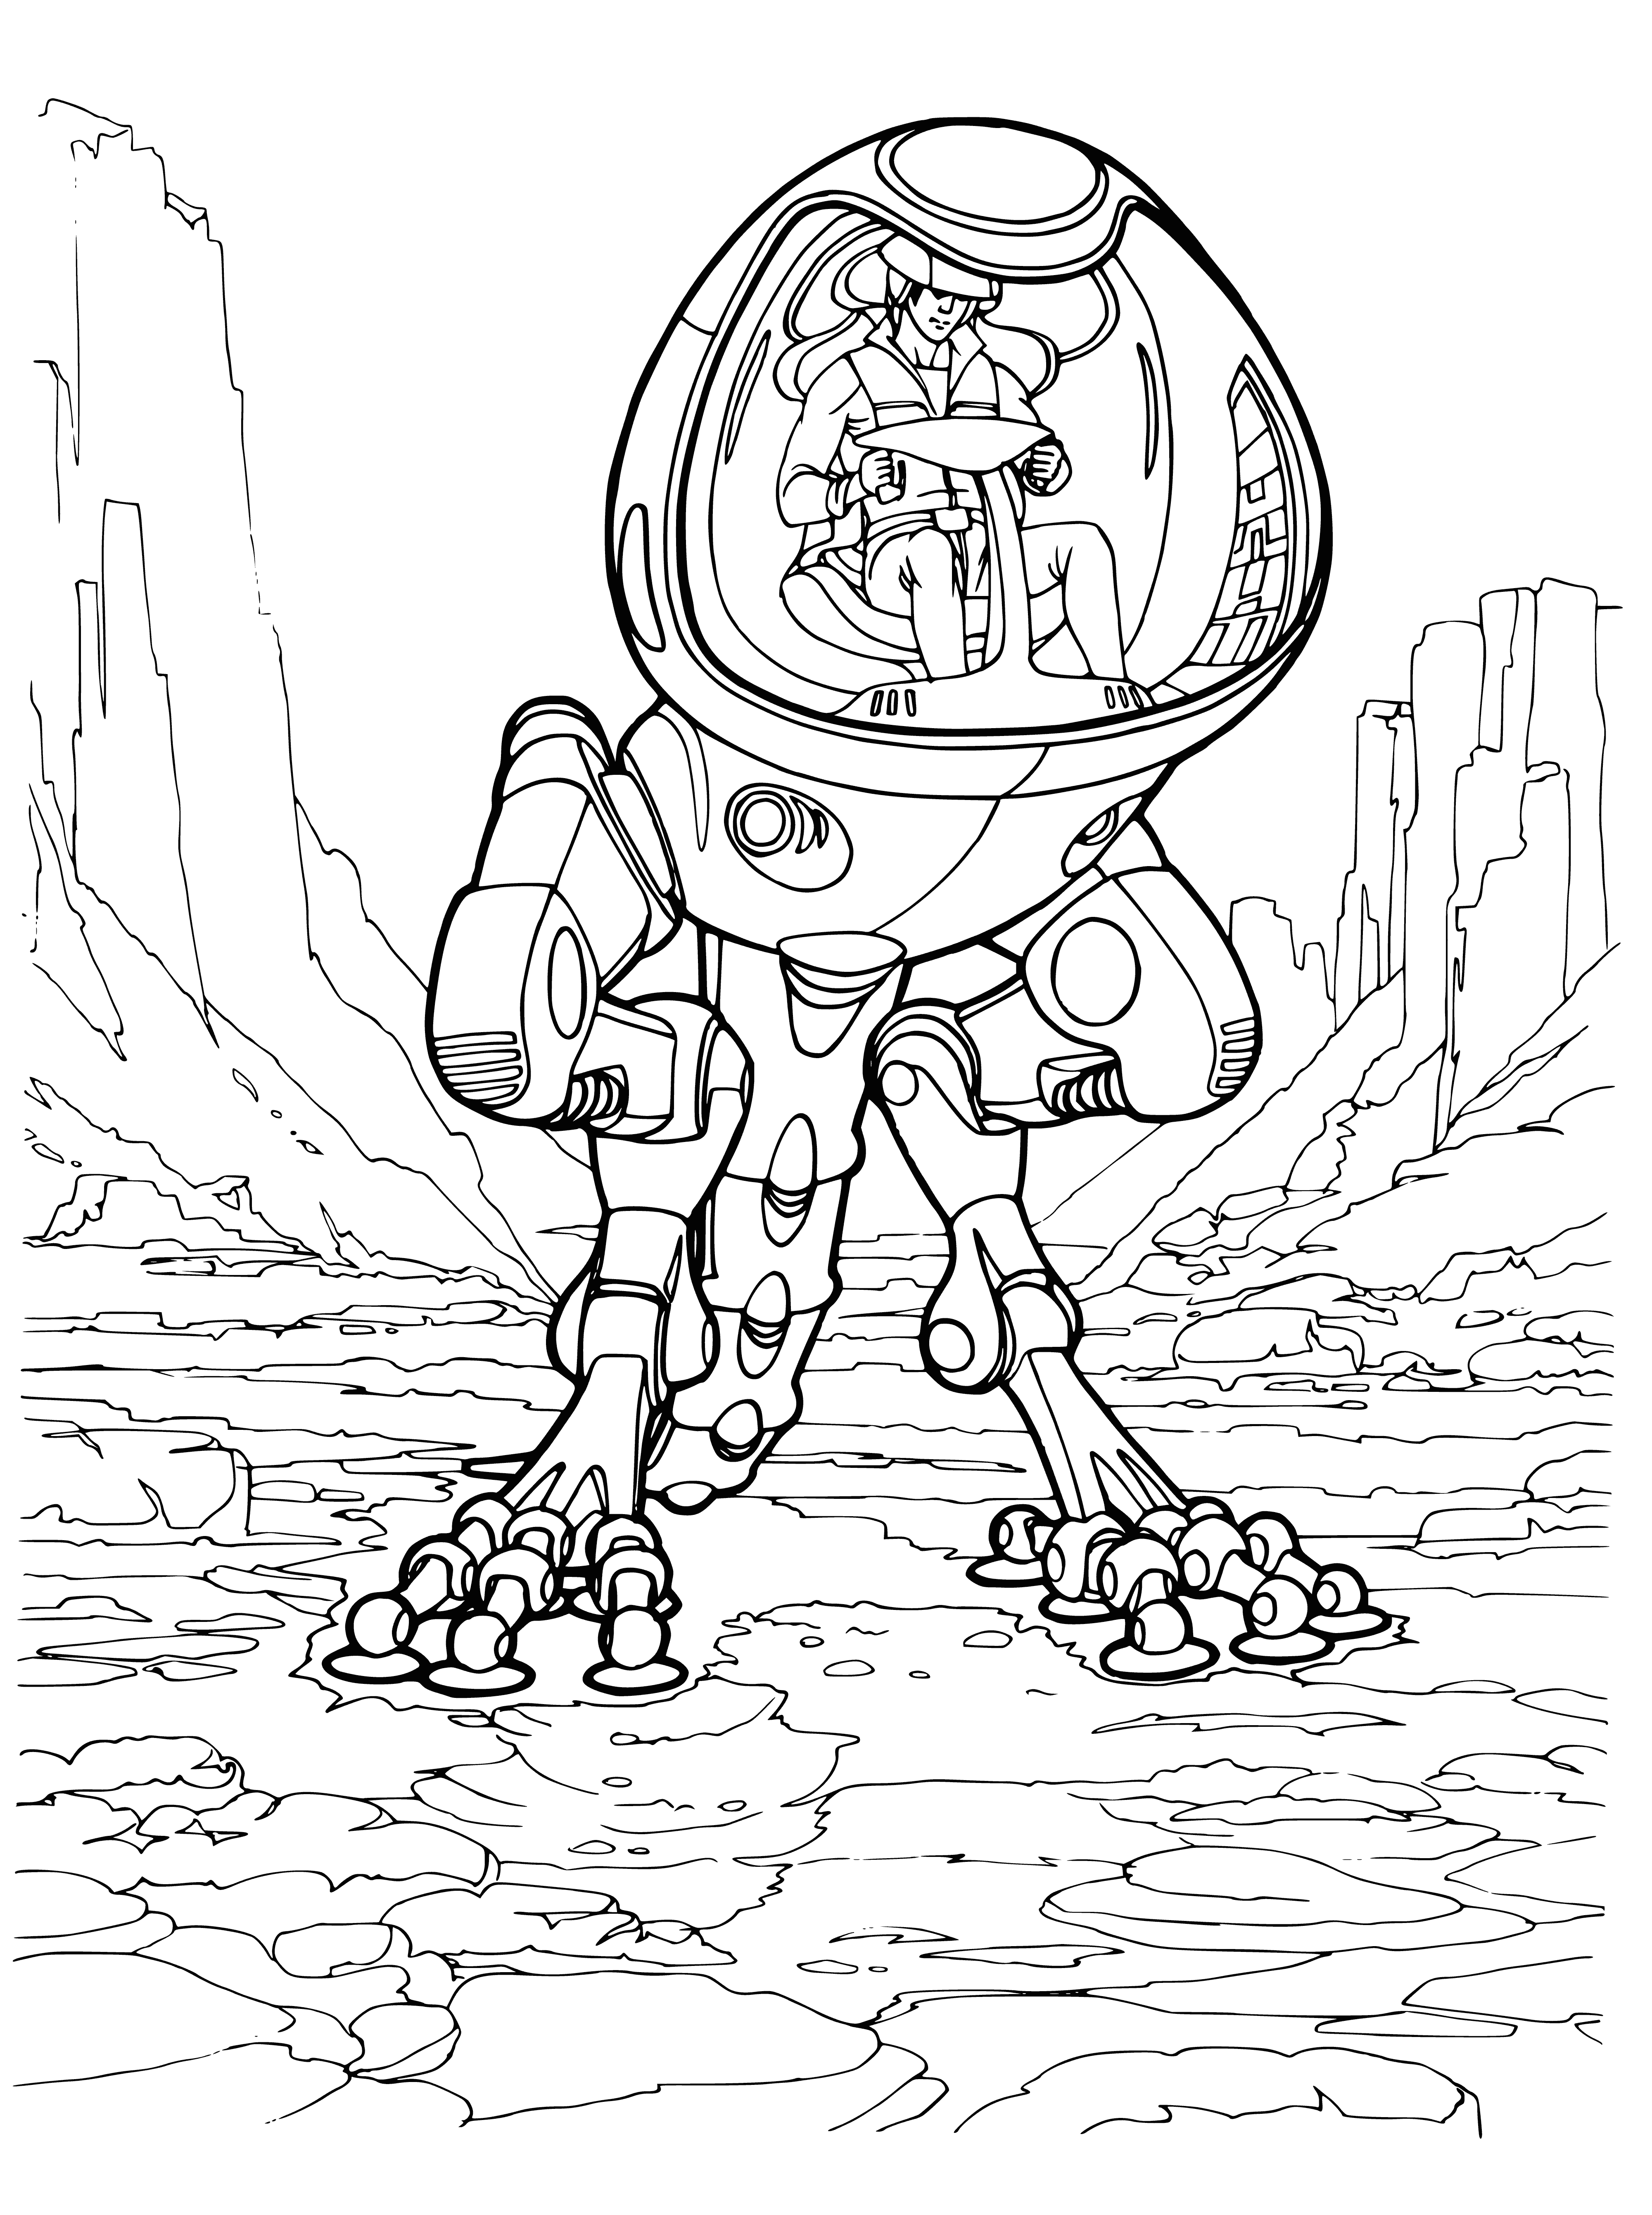 coloring page: People will use two-legged Walkers as main mode of transport. Powered by legs for fast speeds without fatigue. Computer helps navigate and avoid obstacles.